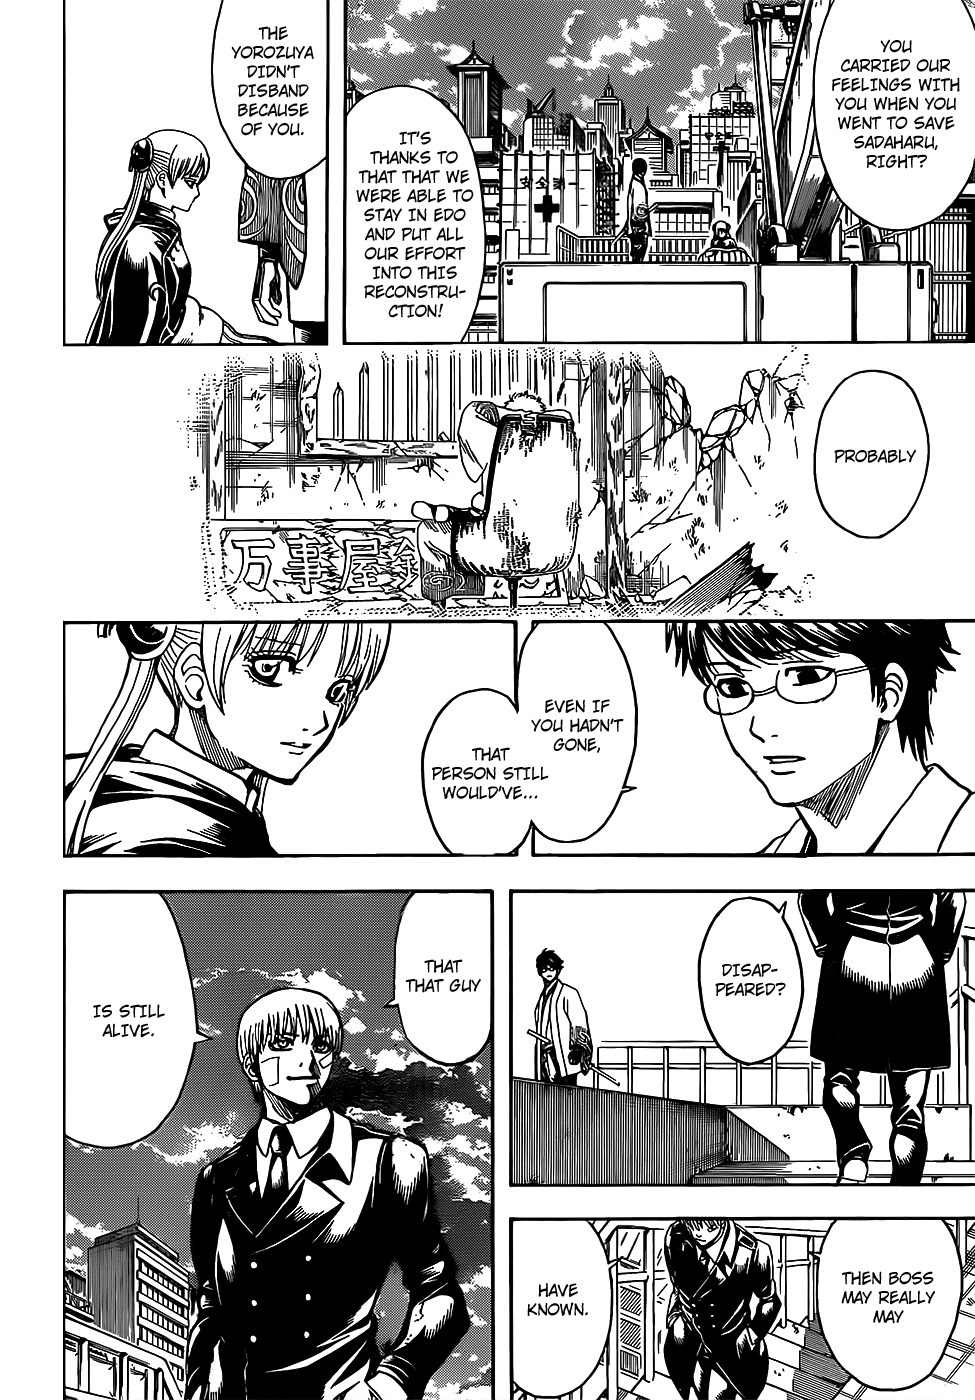 Gintama chapter 678 page 13